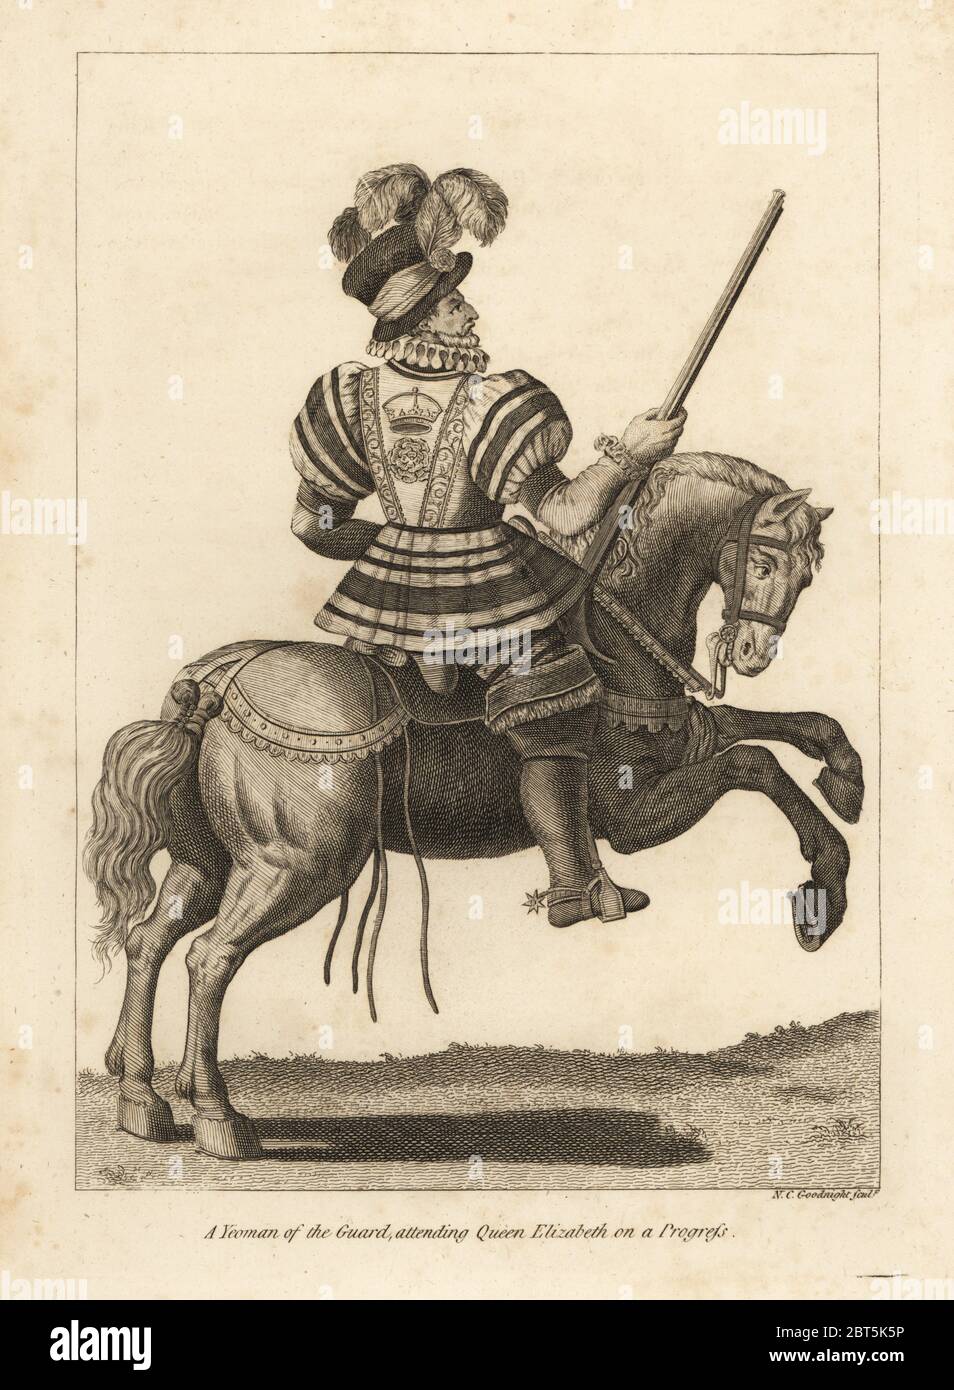 A Yeoman of the Guard attending Queen Elizabeth I on a Progress. Copperplate engraving by N.C. Goodnight from Francis Grose's Military Antiquities respecting a History of the English Army, Stockdale, London, 1812. Stock Photo